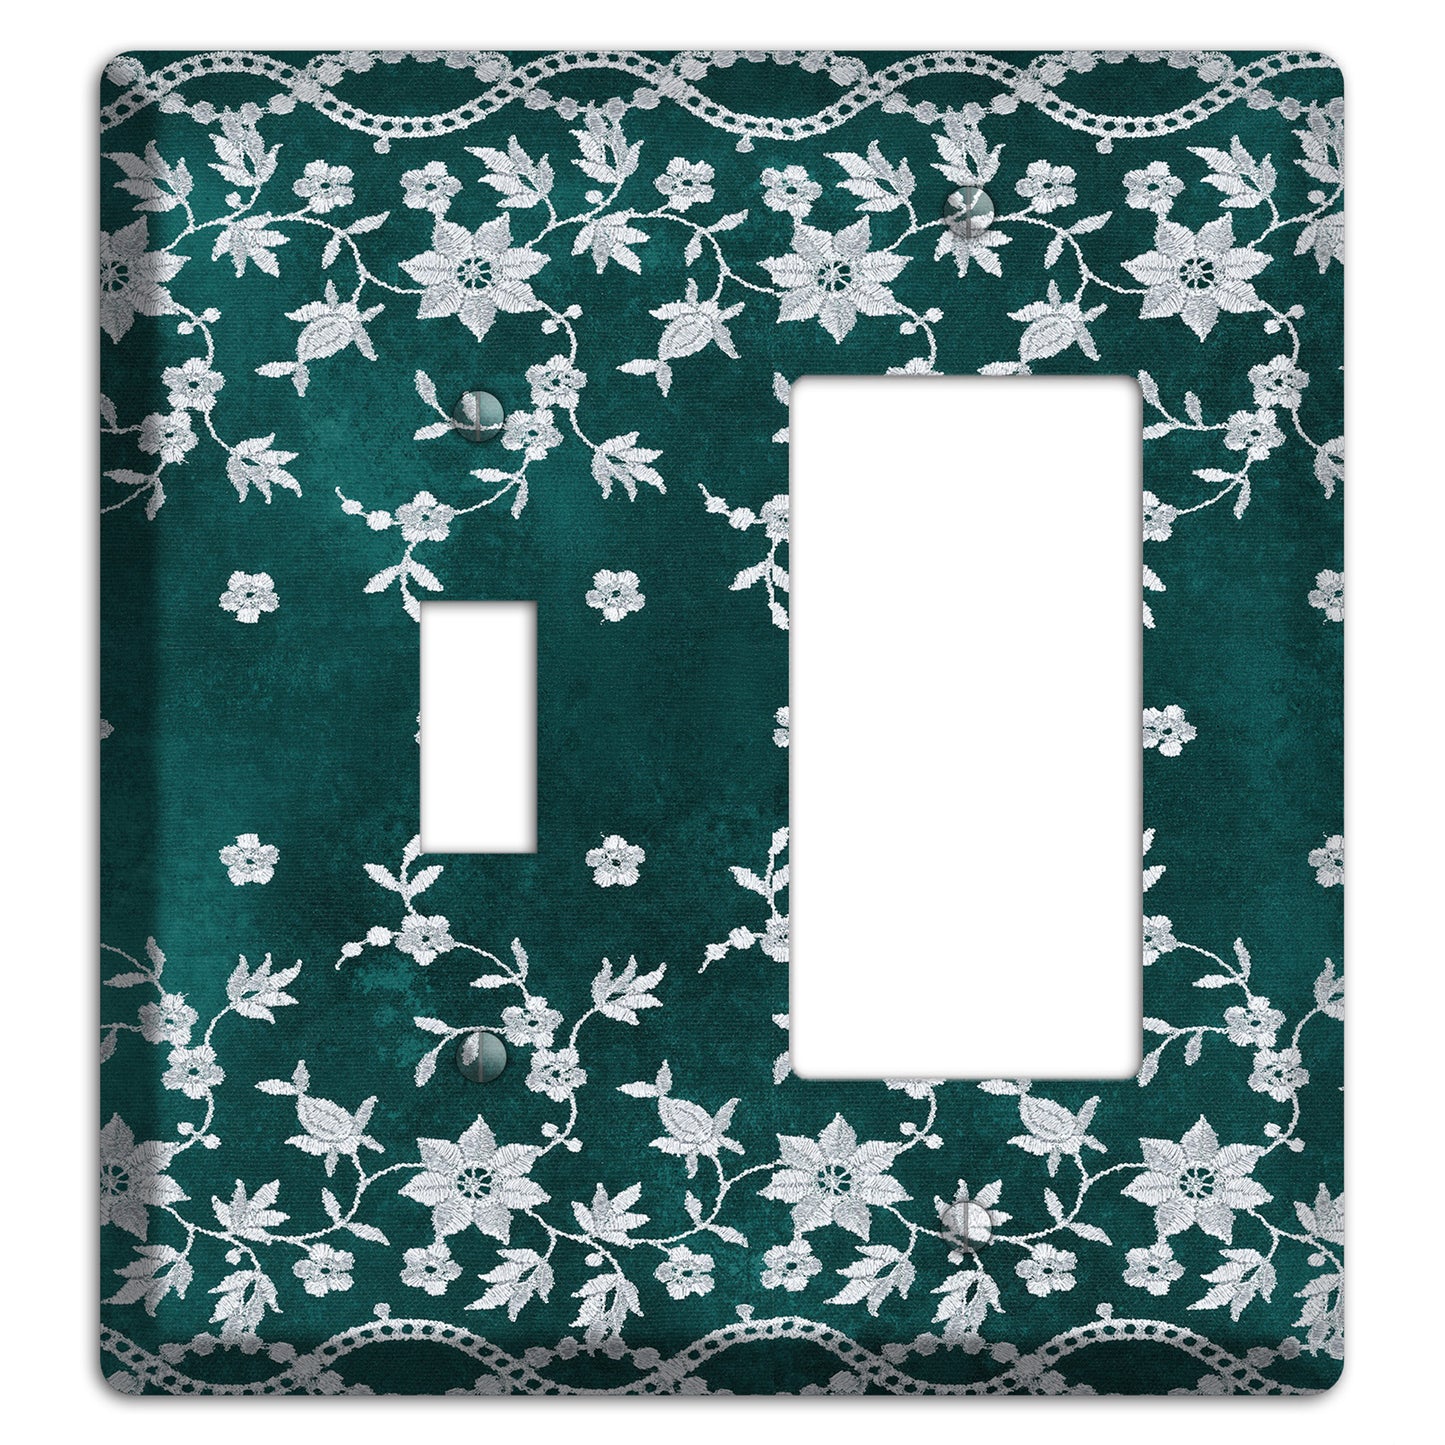 Embroidered Floral Teal Toggle / Rocker Wallplate